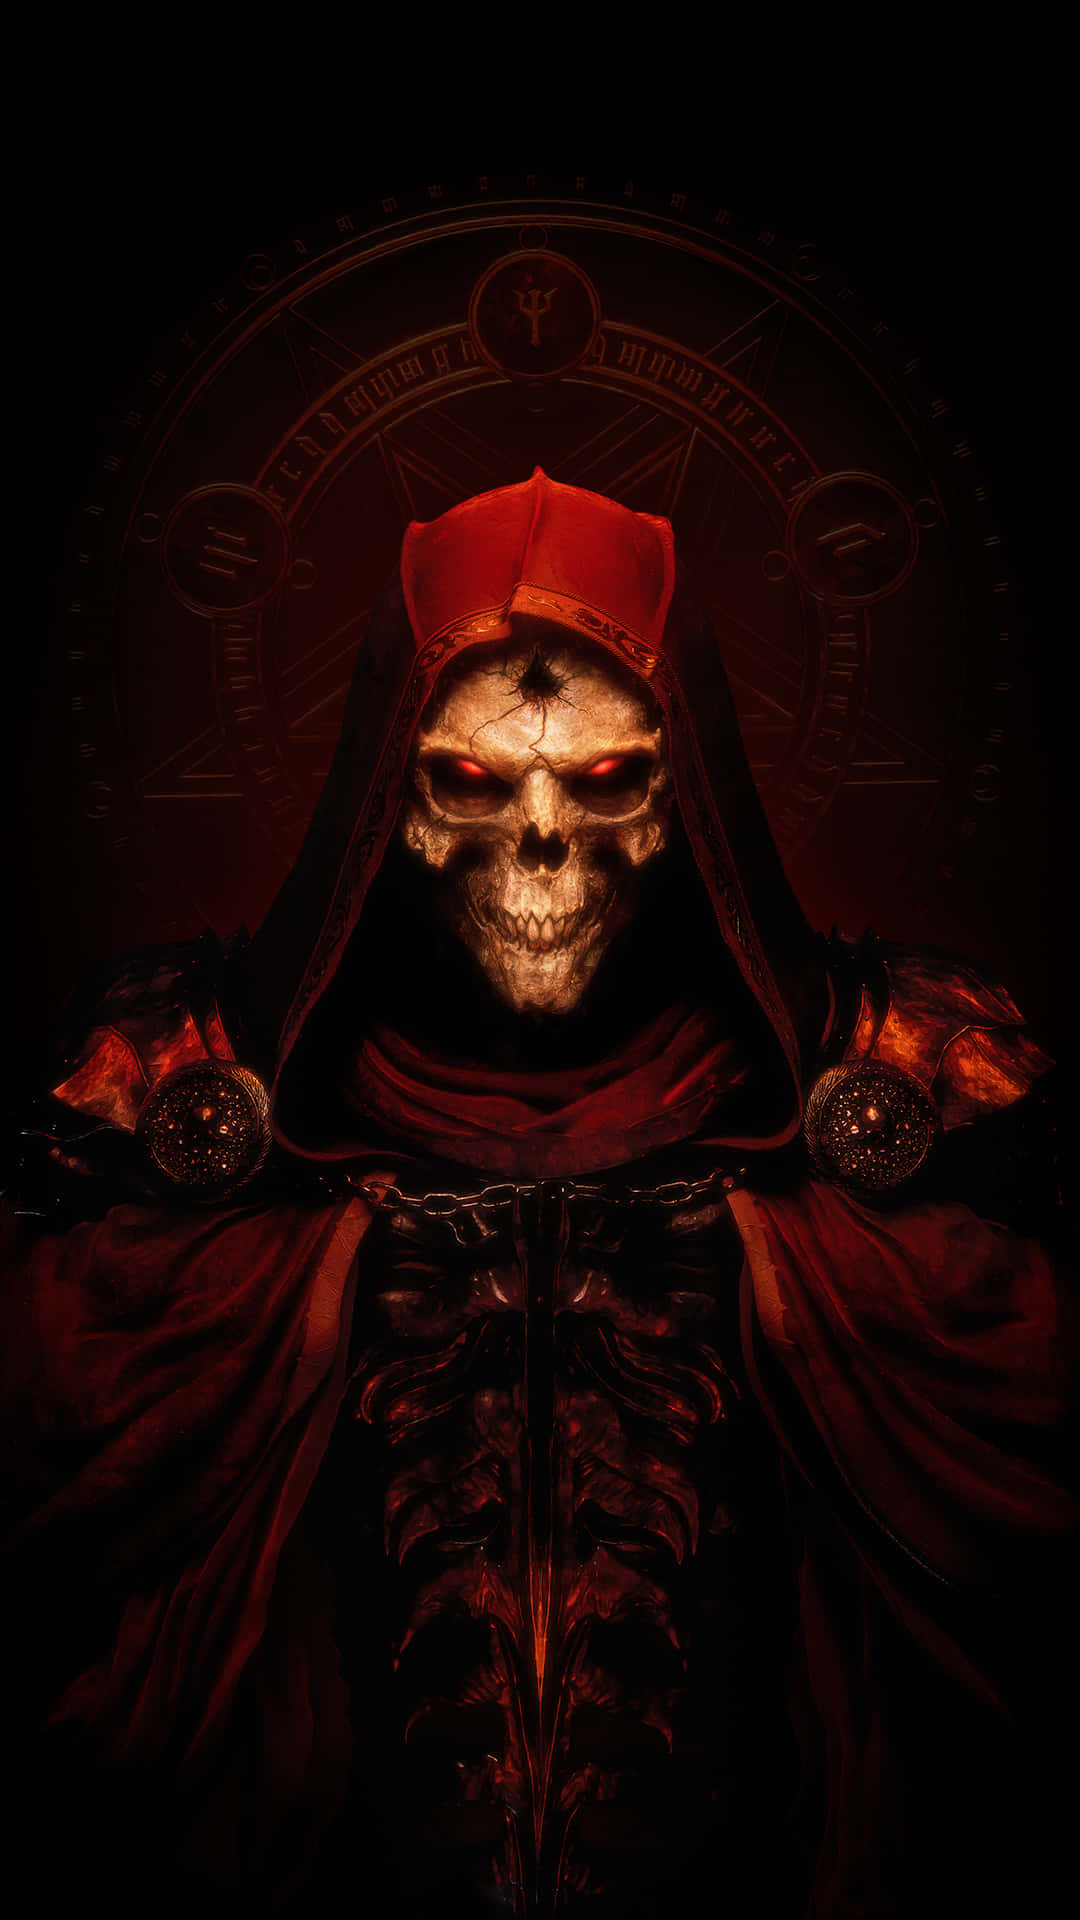 Go on an epic quest with the Diablo 2 video game Wallpaper